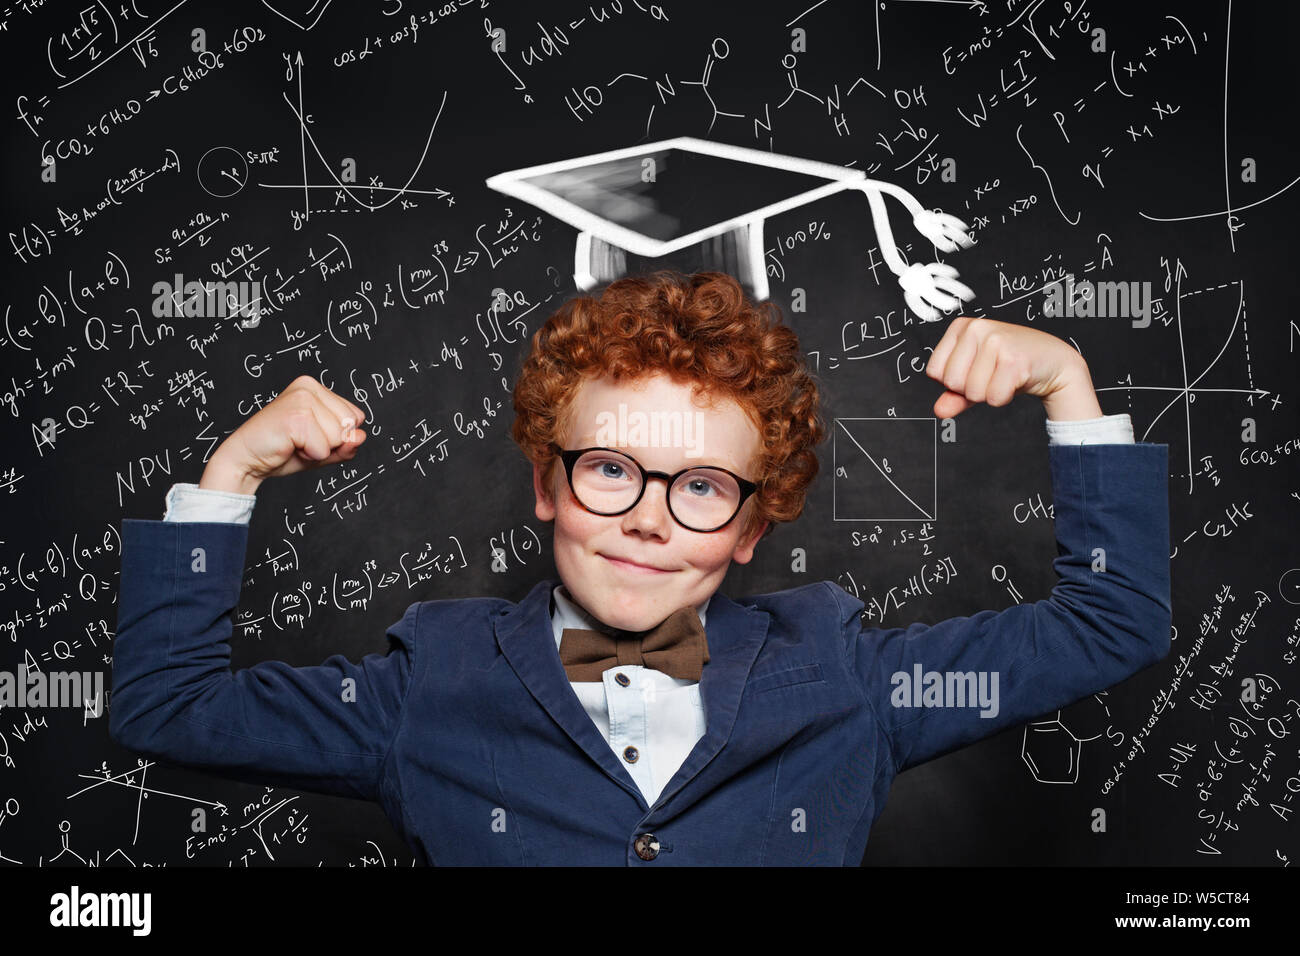 Happy funny kid student on blackboard background with science formulas  Stock Photo - Alamy